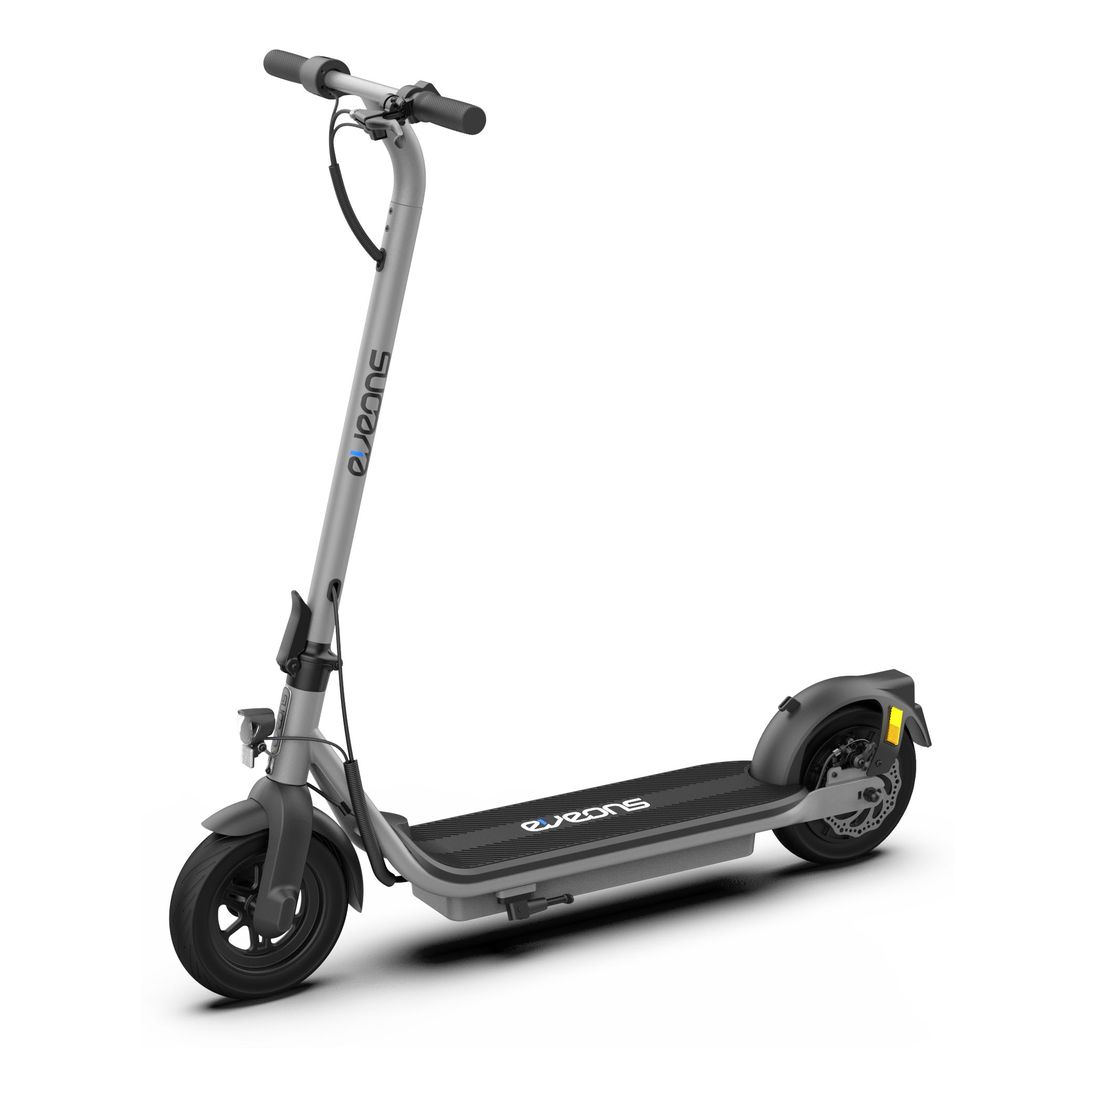 Eveons G-plus Electric Scooter - Grey/Black